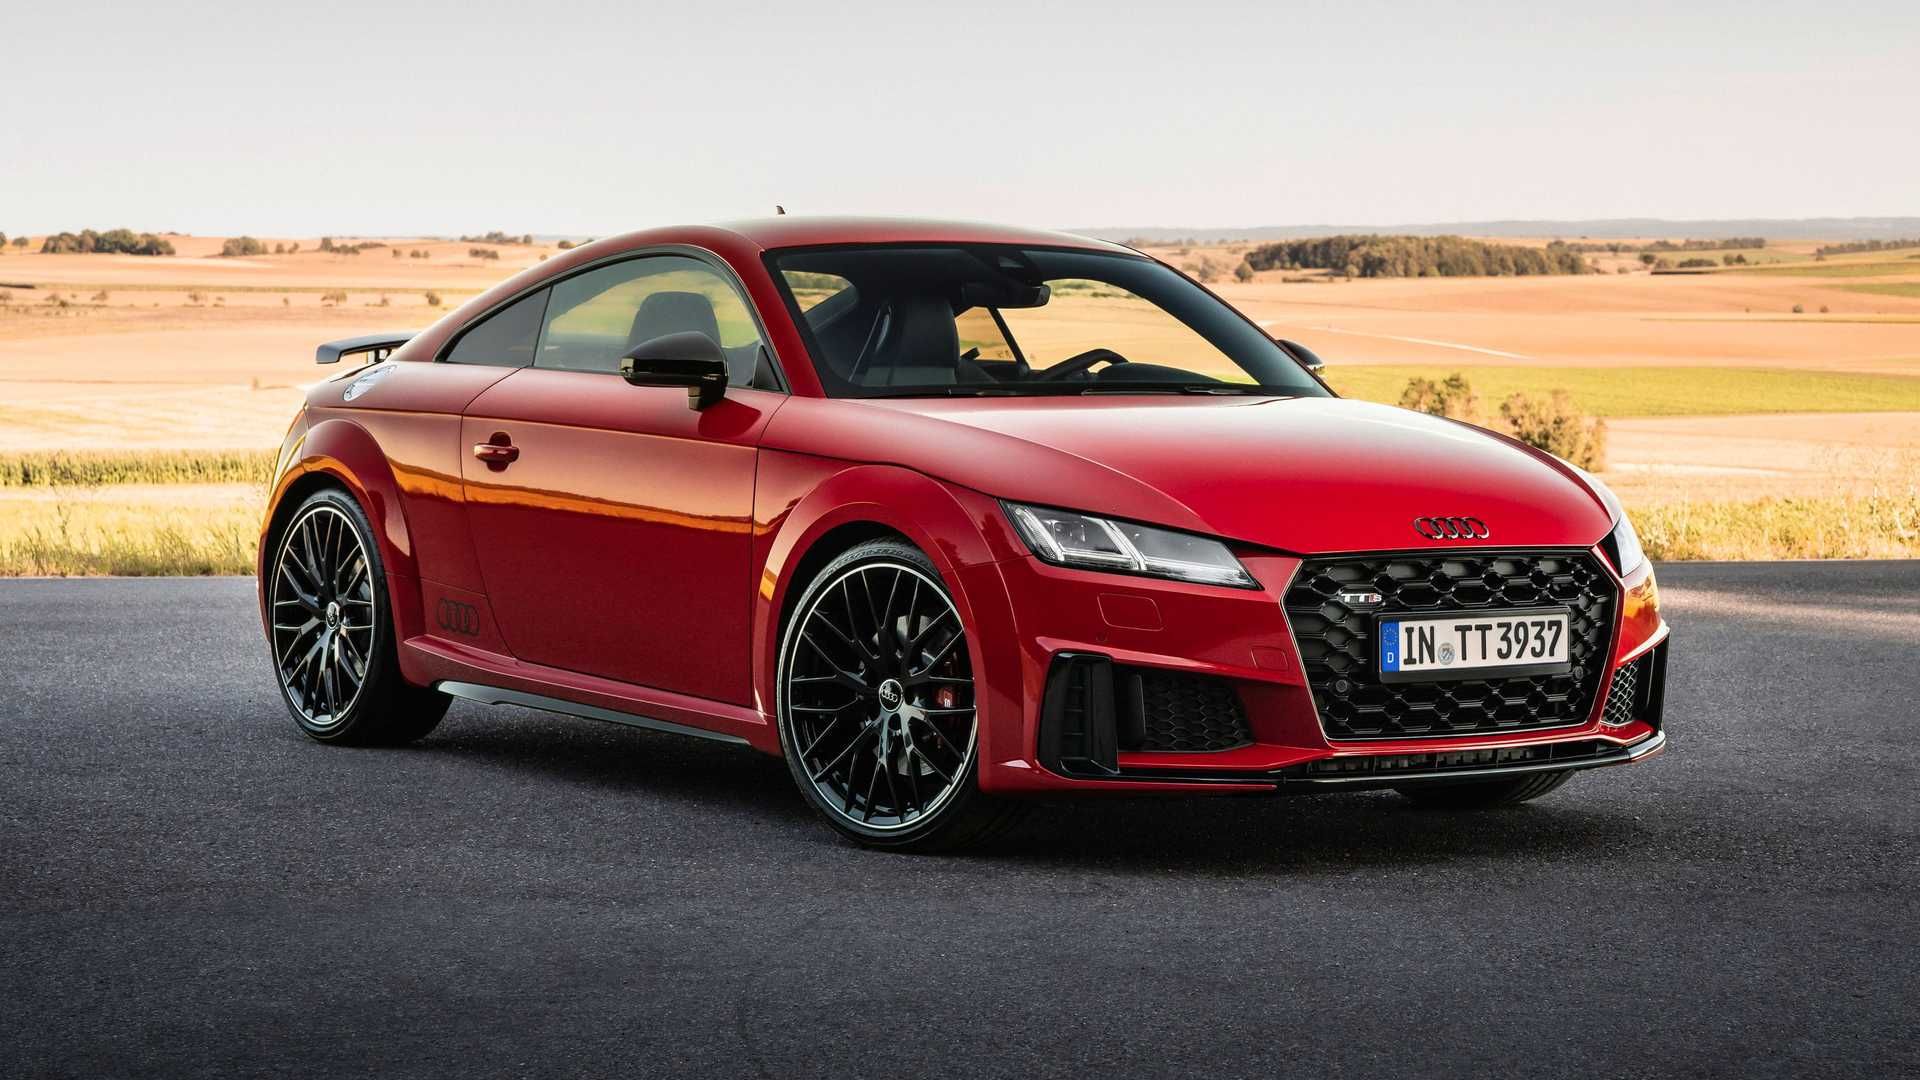 2021 Audi TT parked on the road